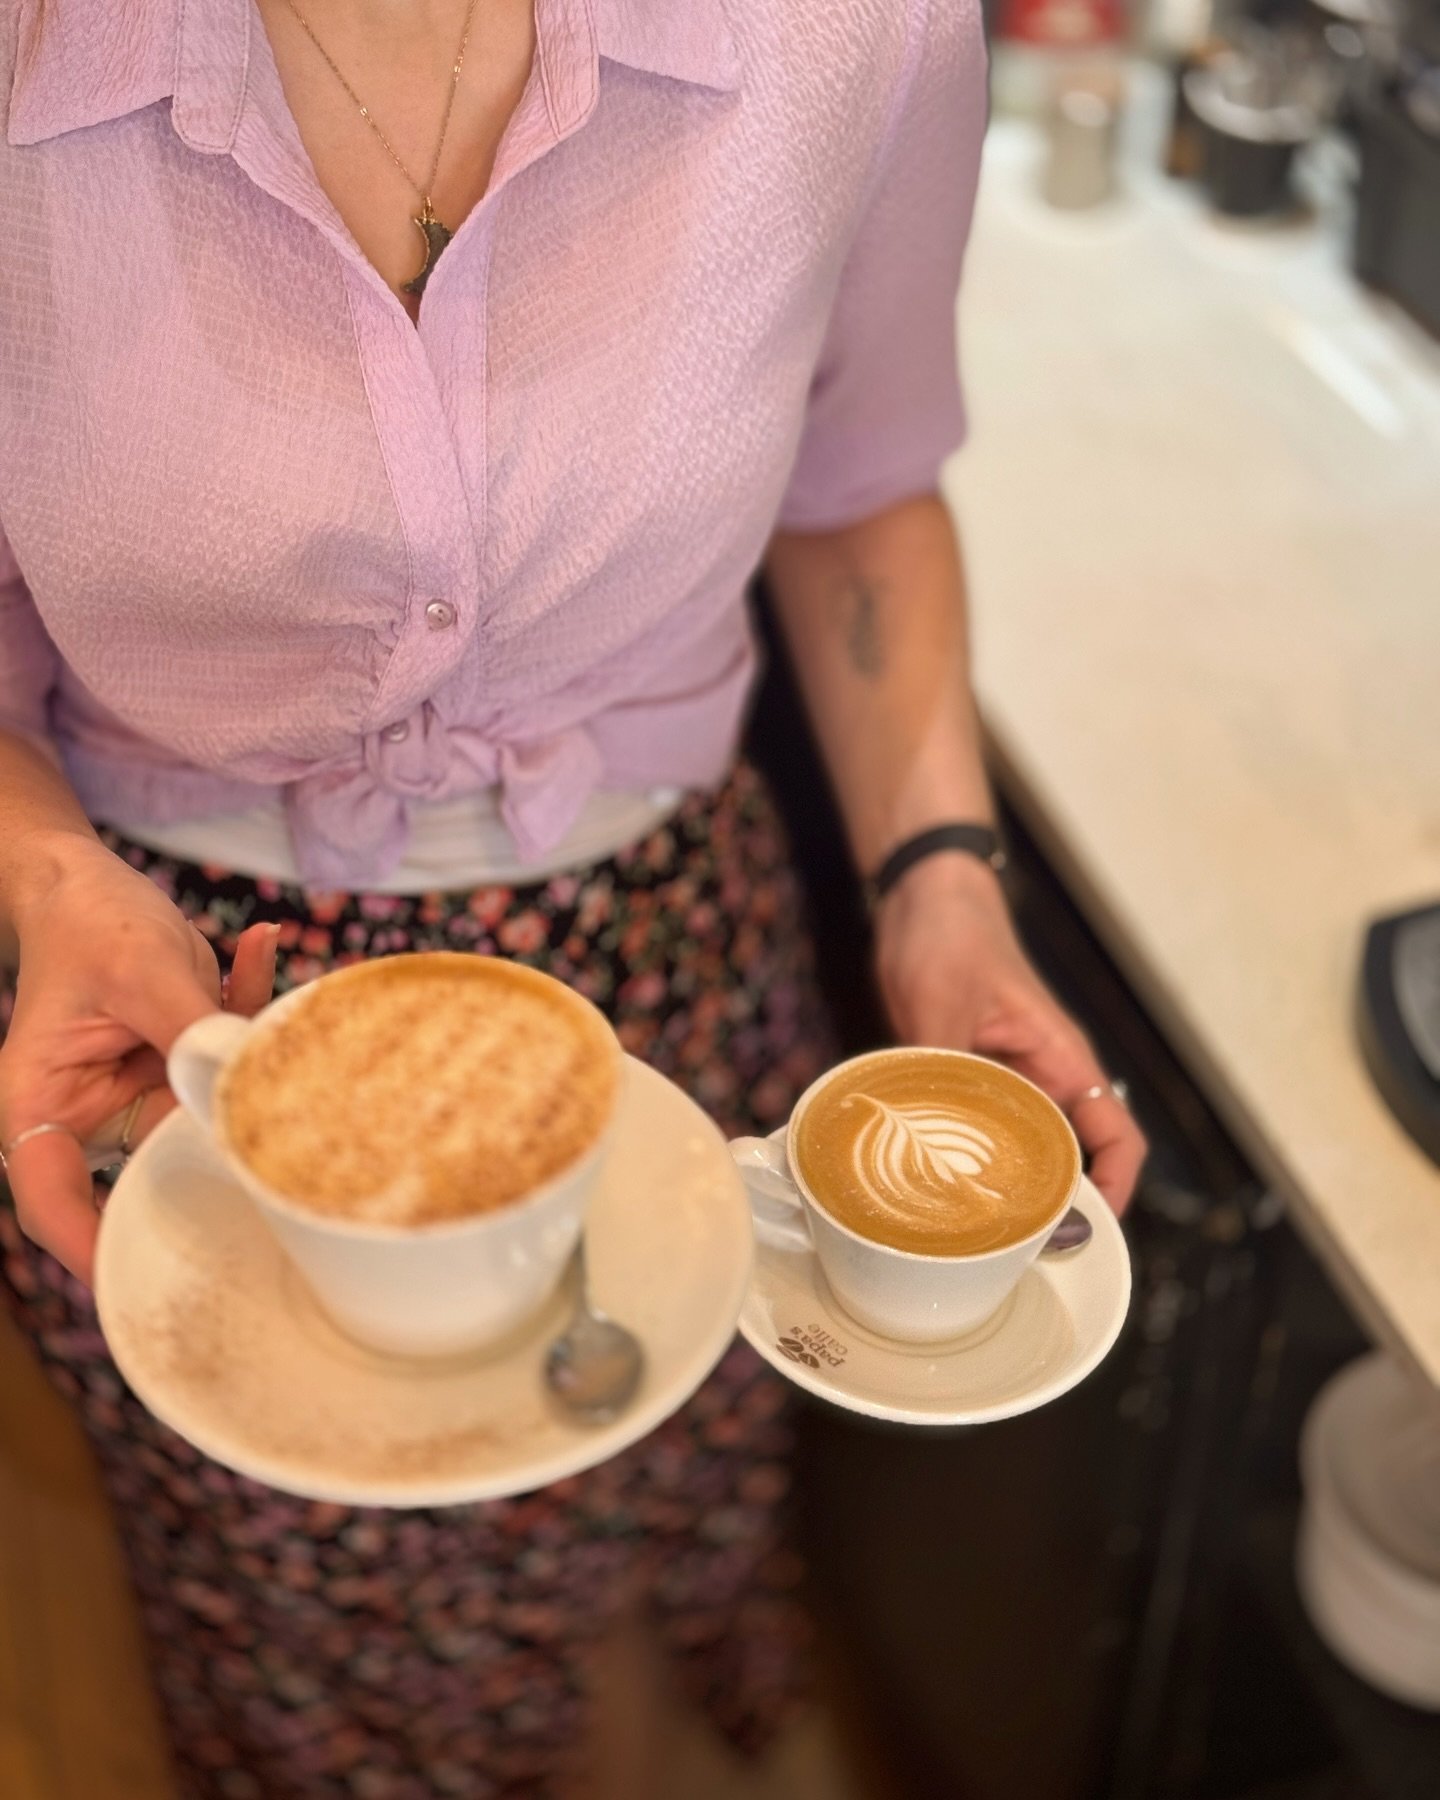 May vibes and sunshine sips ☕️🌞 Perfect weather for a coffee break at our cozy corner. Come enjoy the warmth with us!

 #baristadaily #papascaffe #worcestercoffee #papasworcester #visitworcester #worcestercafes #worcesterfoodie #worcestershirefoodan